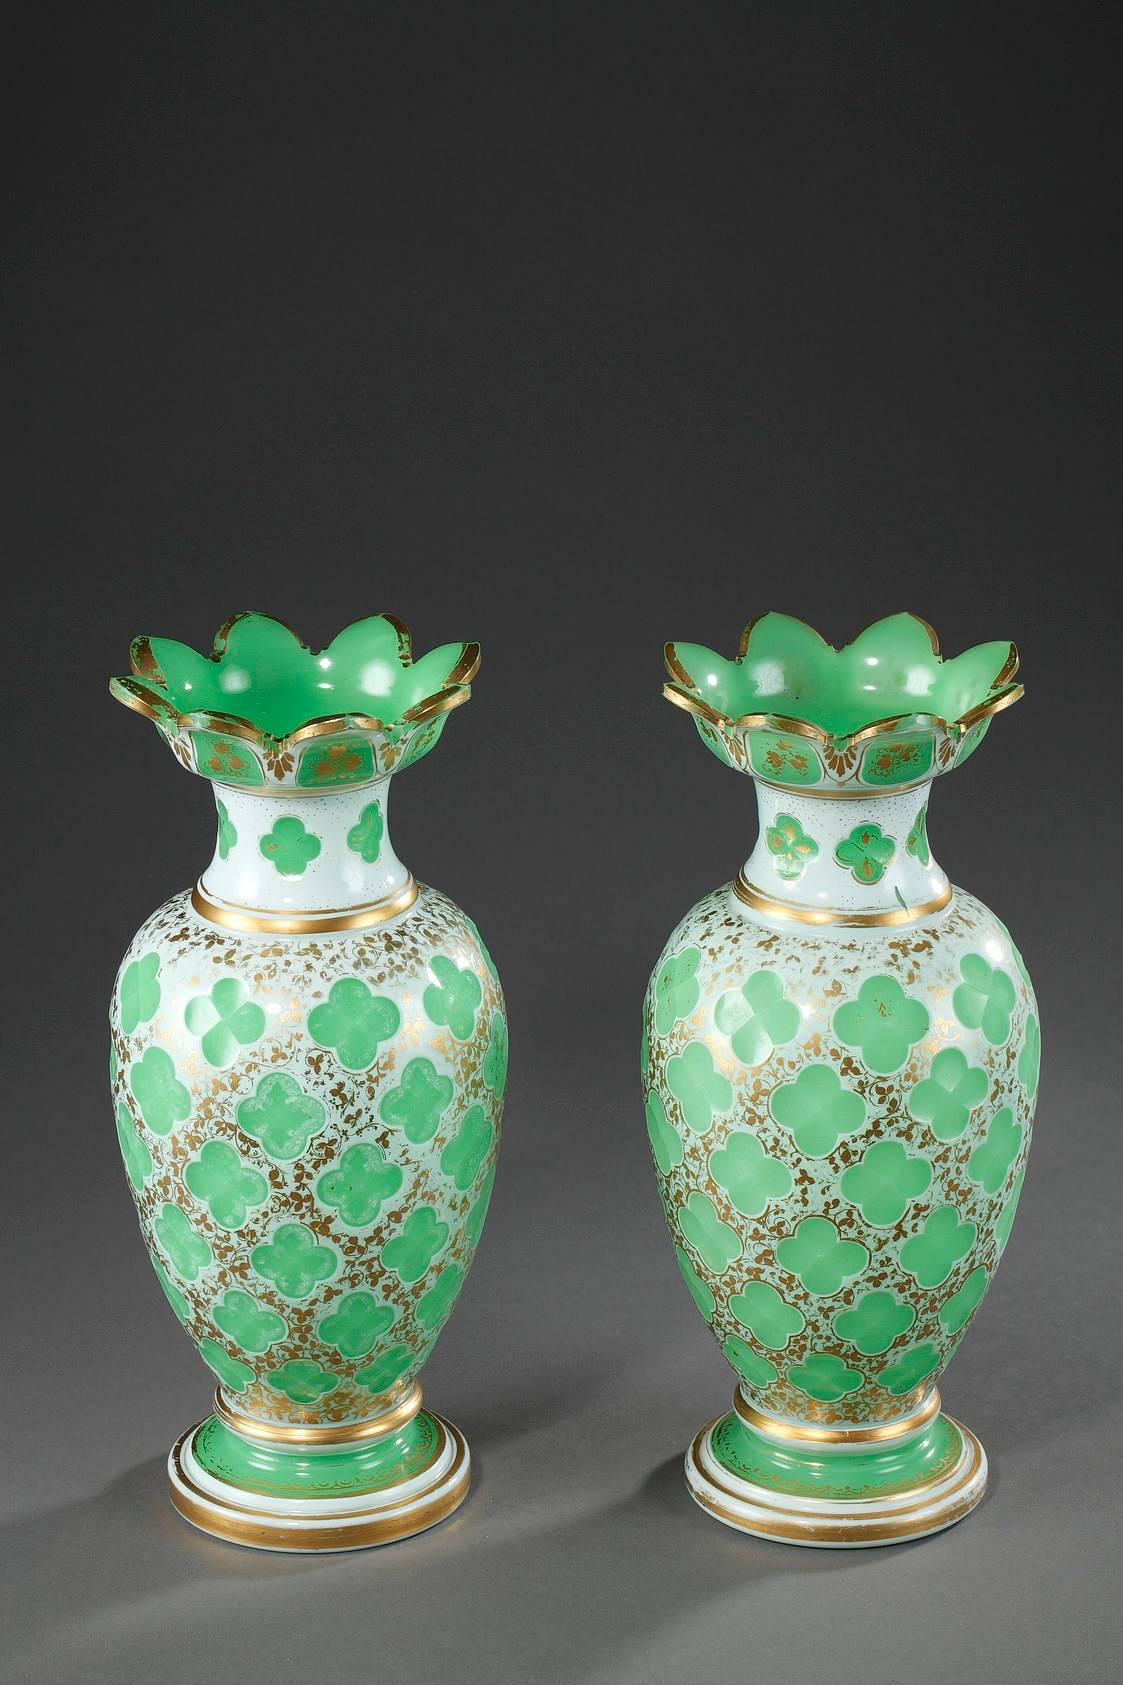 Pair of baluster-shaped decorative vases in opaline overlay with wide, petal-shaped rims. They are richly decorated with green, four-leaf clovers on a background highlighted with gilded, flowery garlands. The foot, heel, collar, and rim are